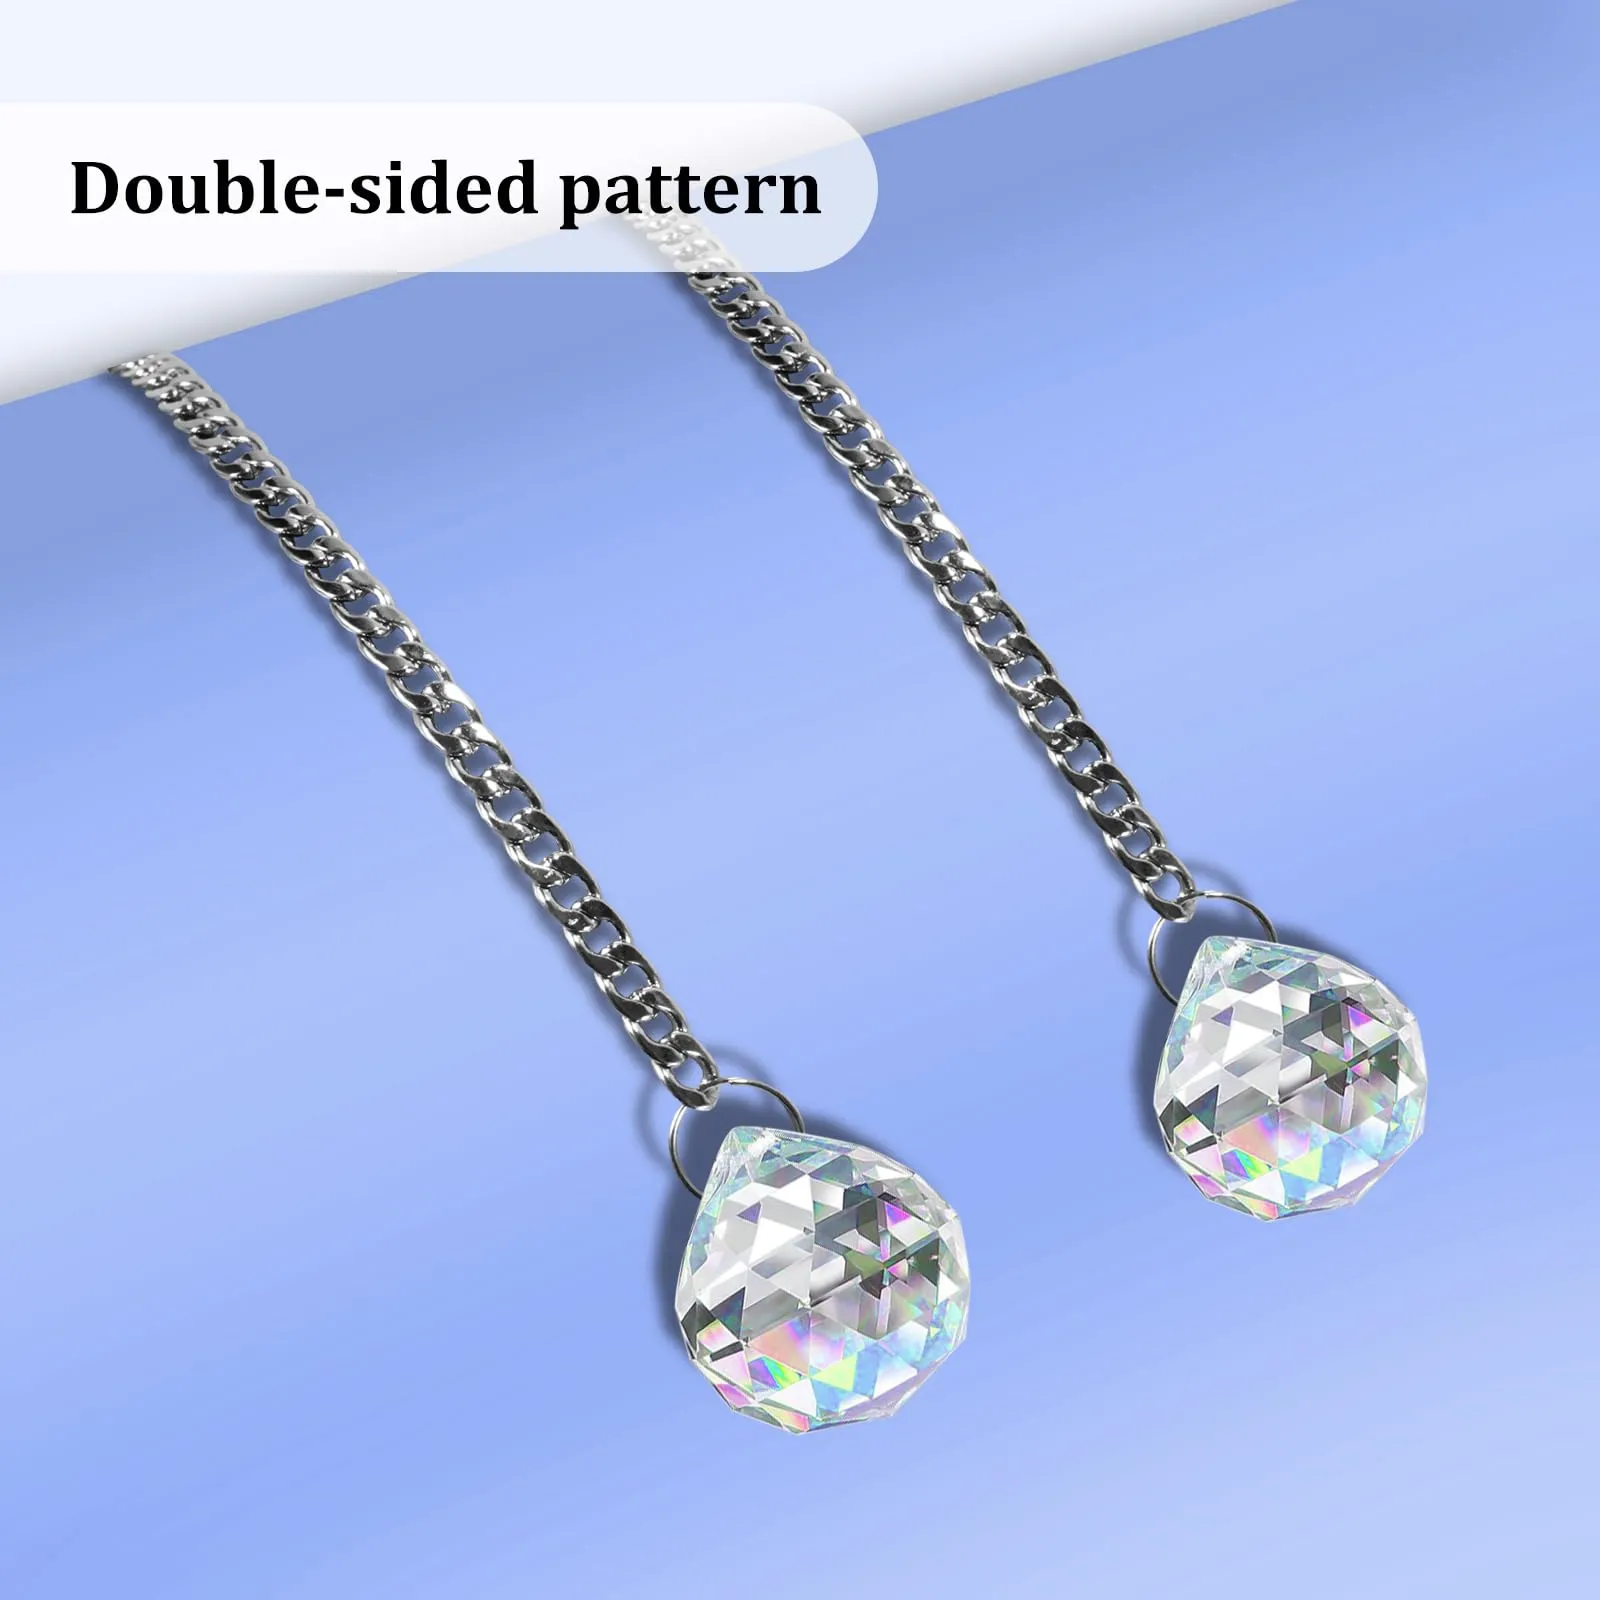  cup charms cup pendant decoration for personalized  cup handle charm crystal ball shape .